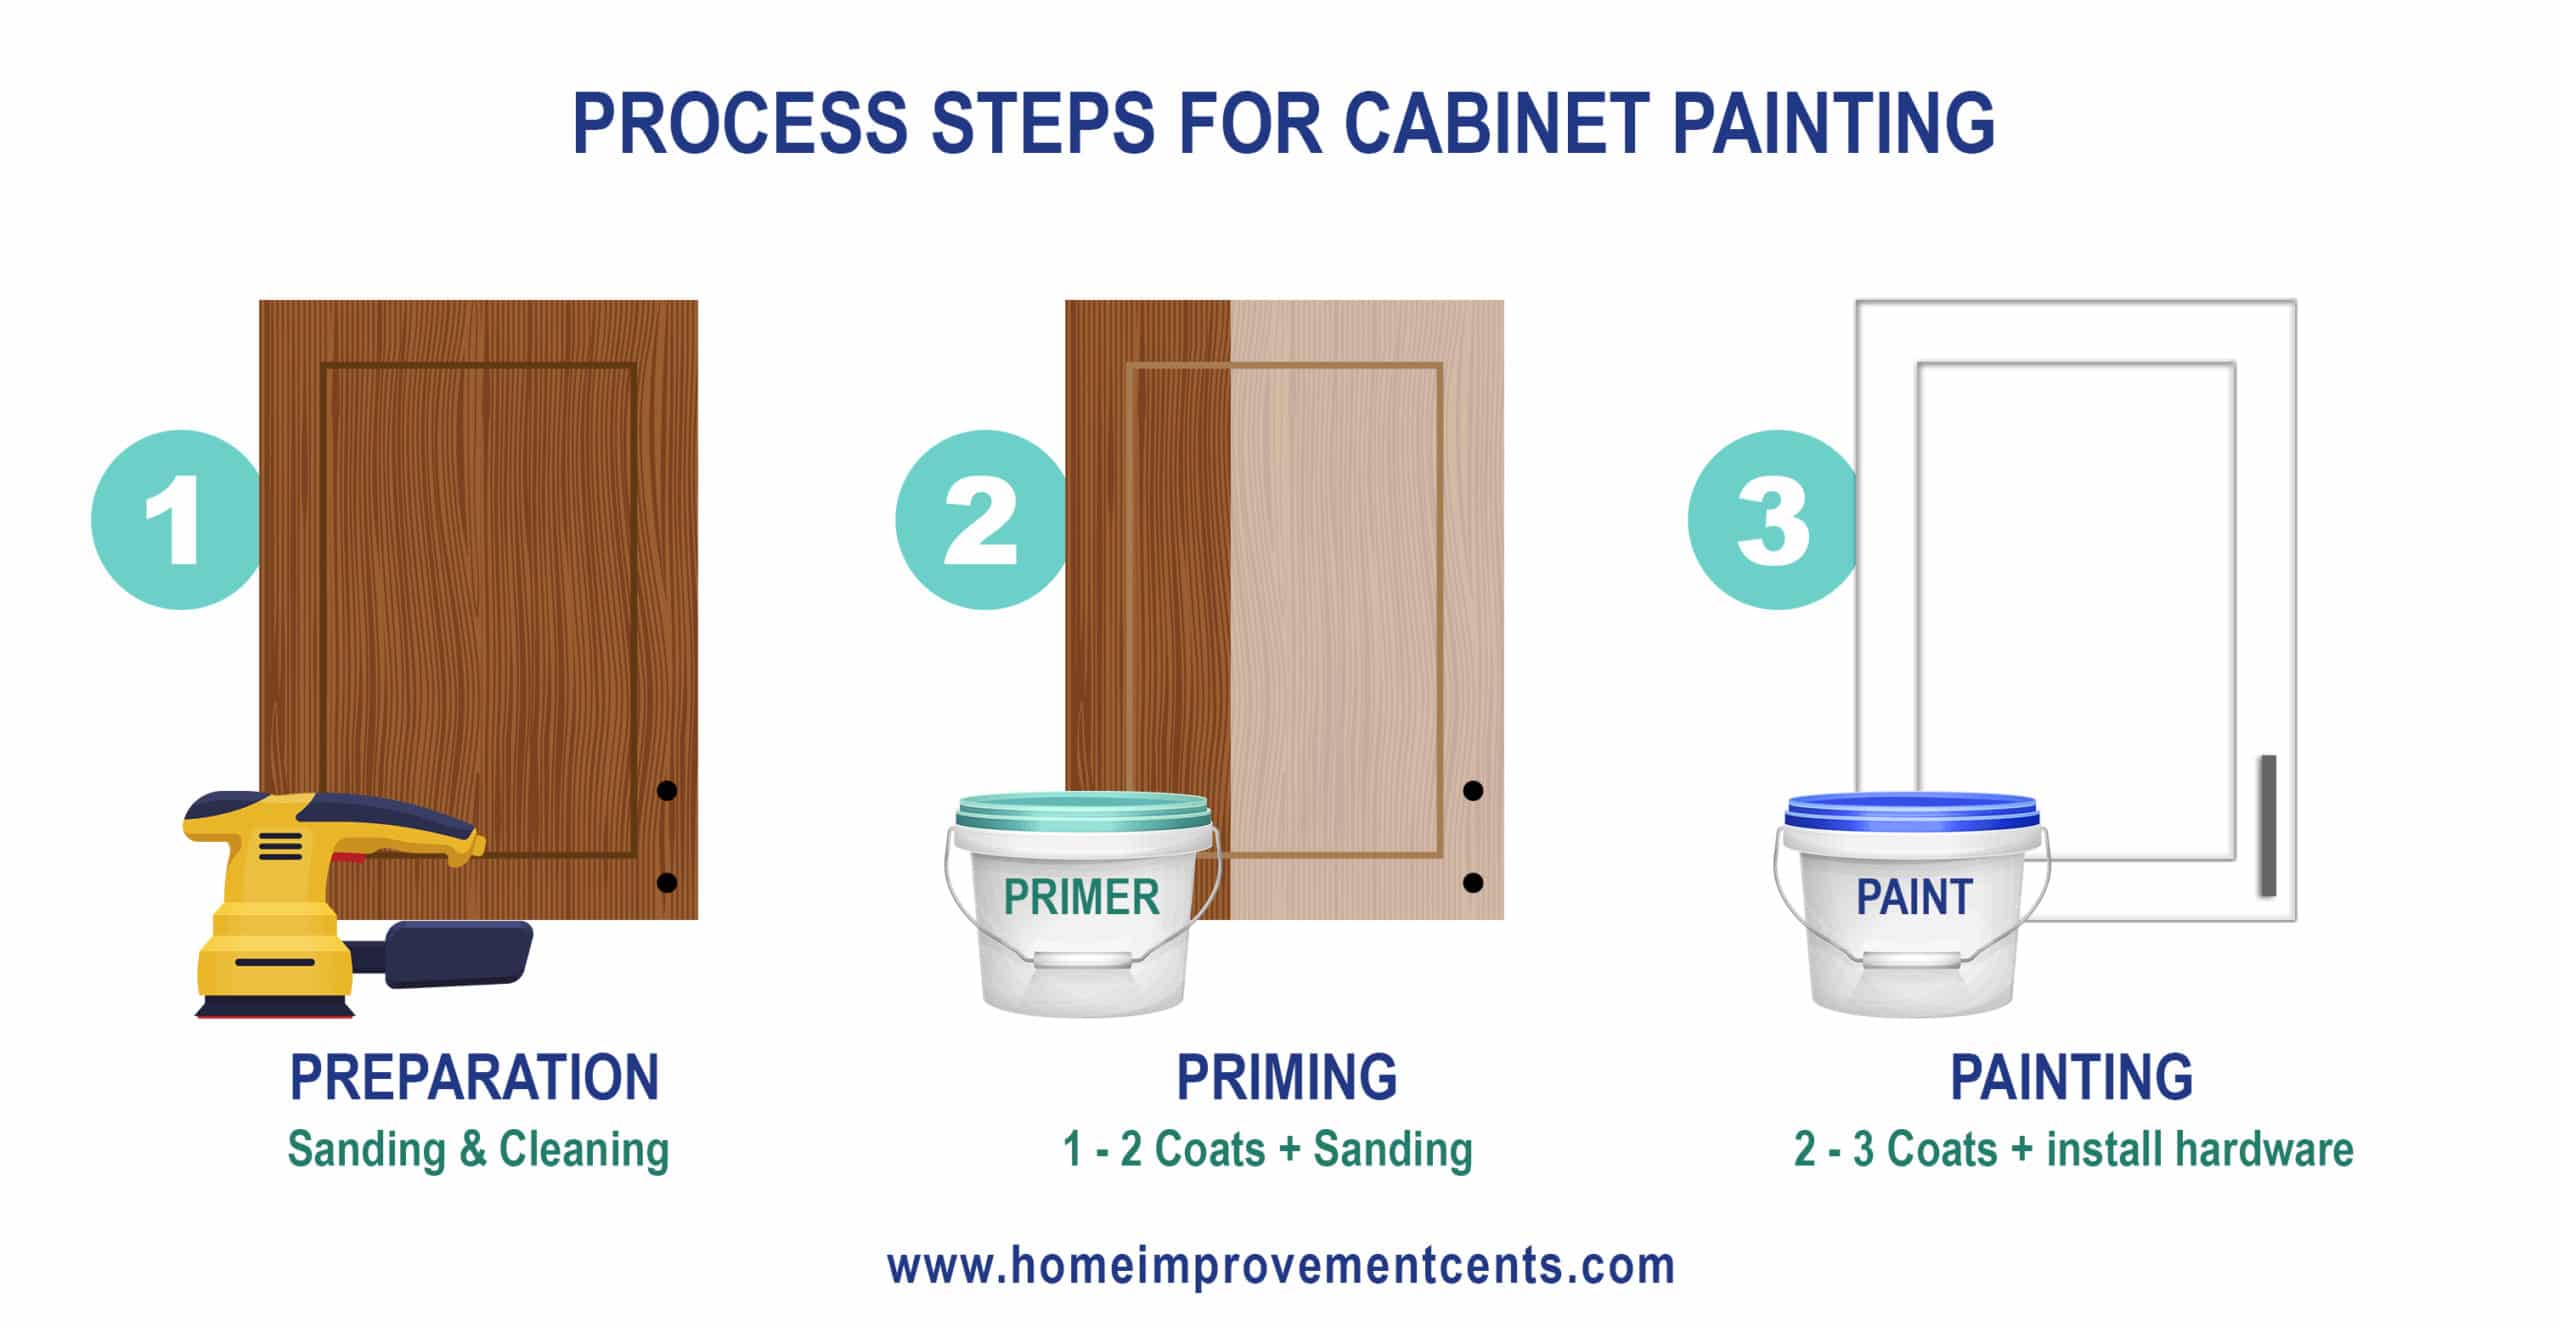 Cabinet Painting Process Breakdown Step-by-Step